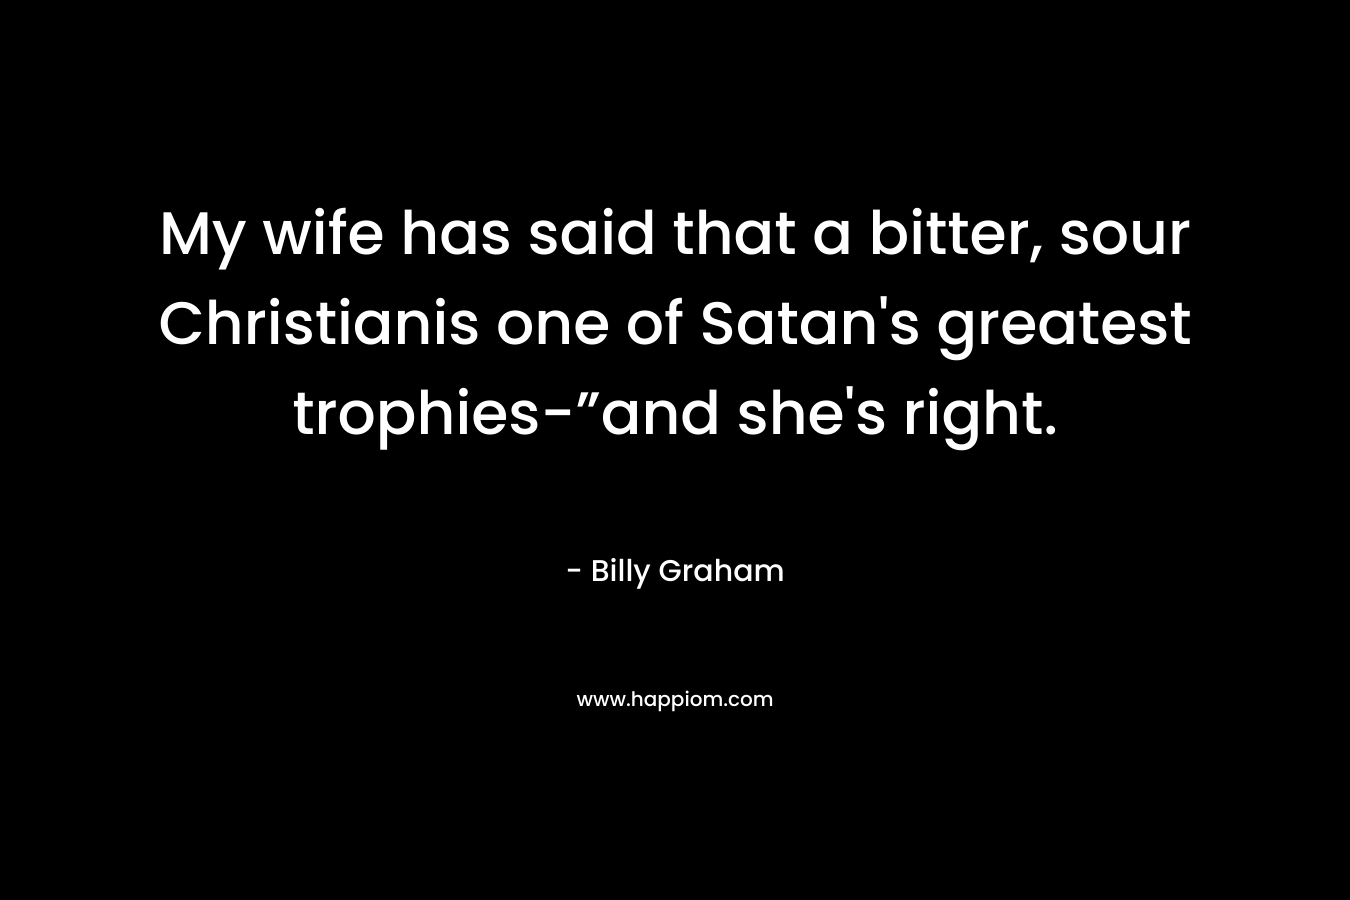 My wife has said that a bitter, sour Christianis one of Satan’s greatest trophies-”and she’s right. – Billy Graham